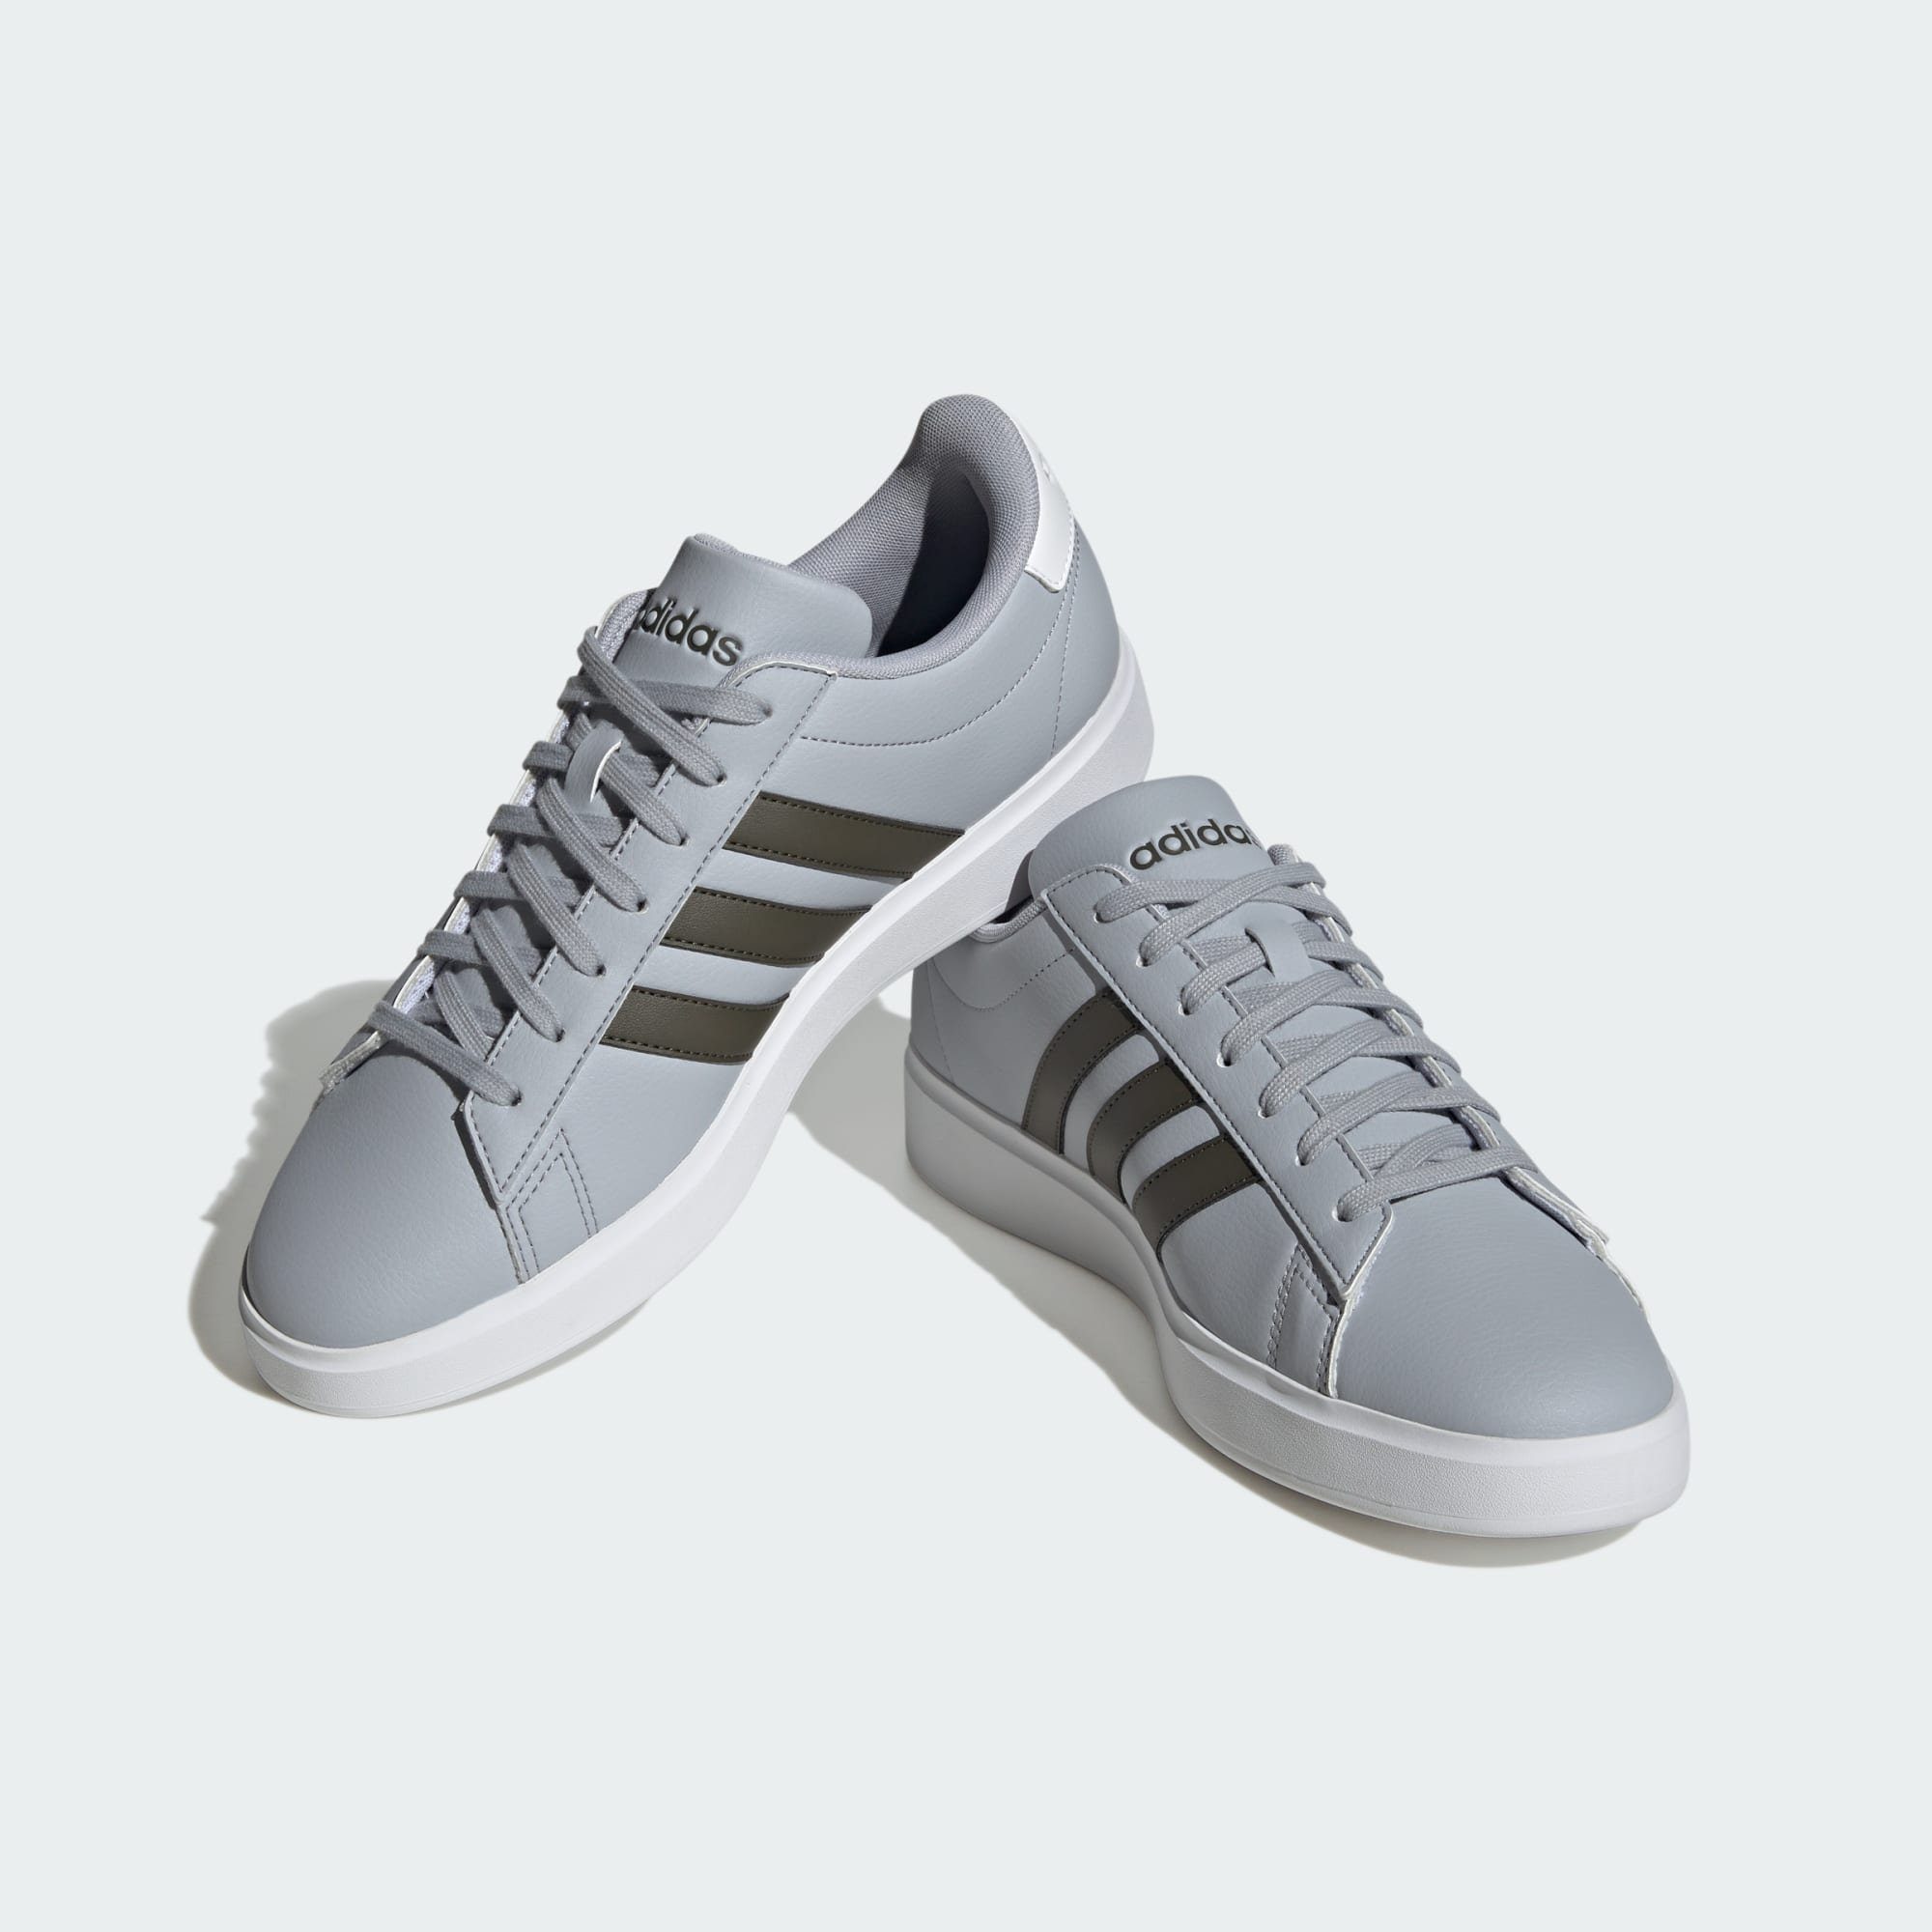 adidas Sportswear GRAND COURT CLOUDFOAM COMFORT SCHUH Sneaker Halo Silver / Shadow Olive / Cloud White